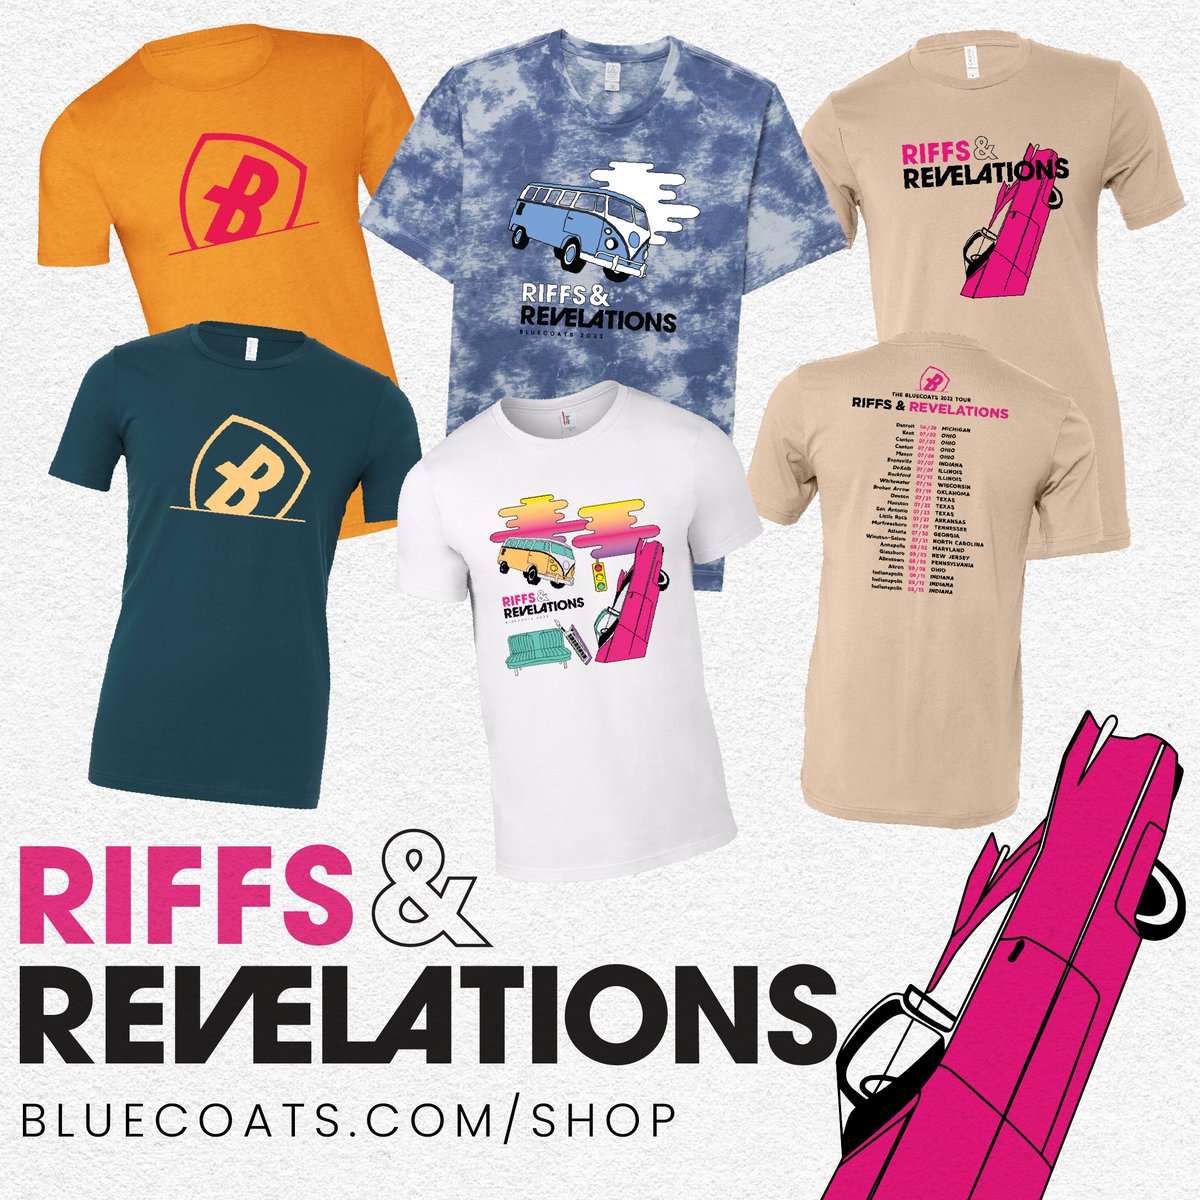 🤩 Items are on Sale at the Bluecoats Marketplace 🤩 Find some new apparel for Fall at bluecoats.com/shop, with plenty of items on sale—including our Riffs & Revelations tees!